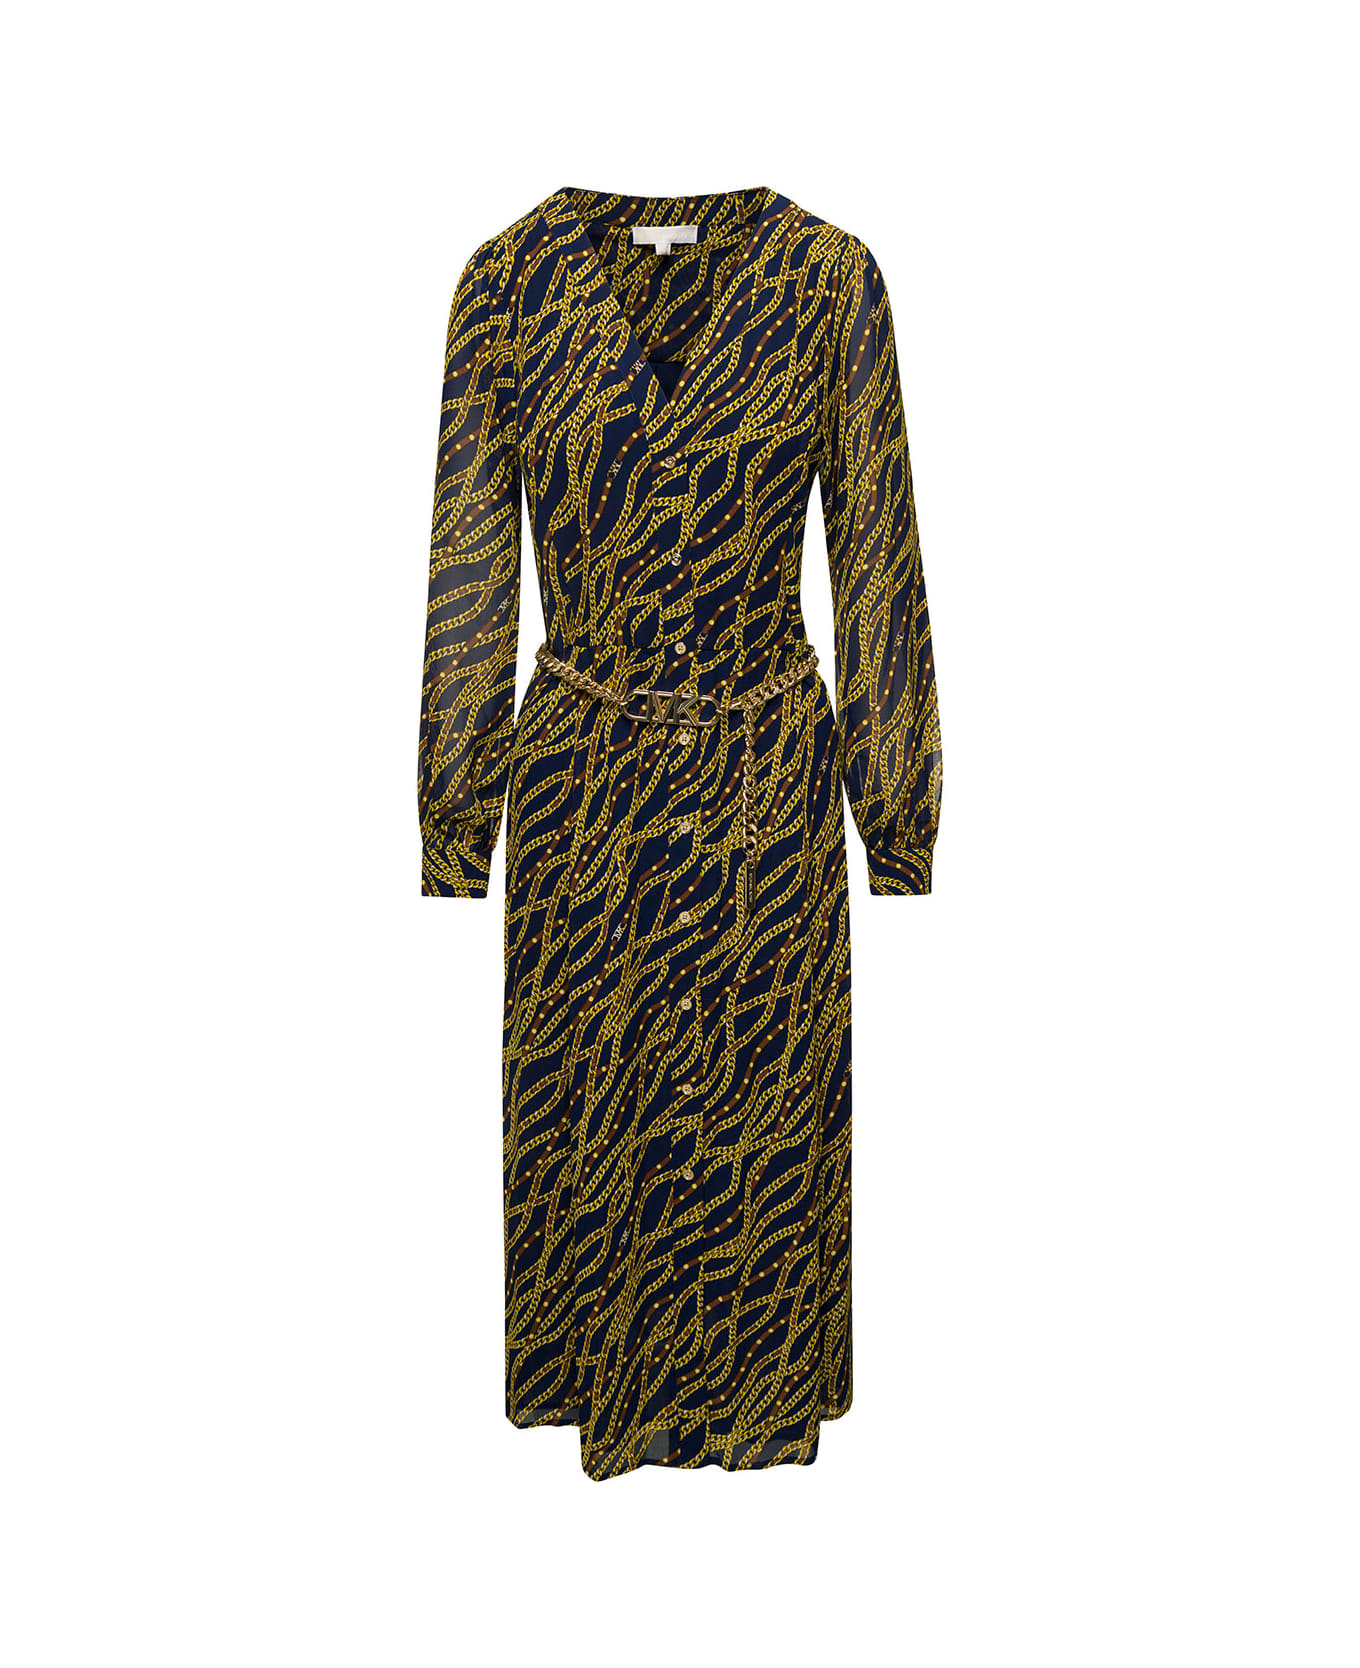 MICHAEL Michael Kors Black And Gold-tone Midi Shirt Dess With Chain Print All-over In Polyester Woman - Multicolor